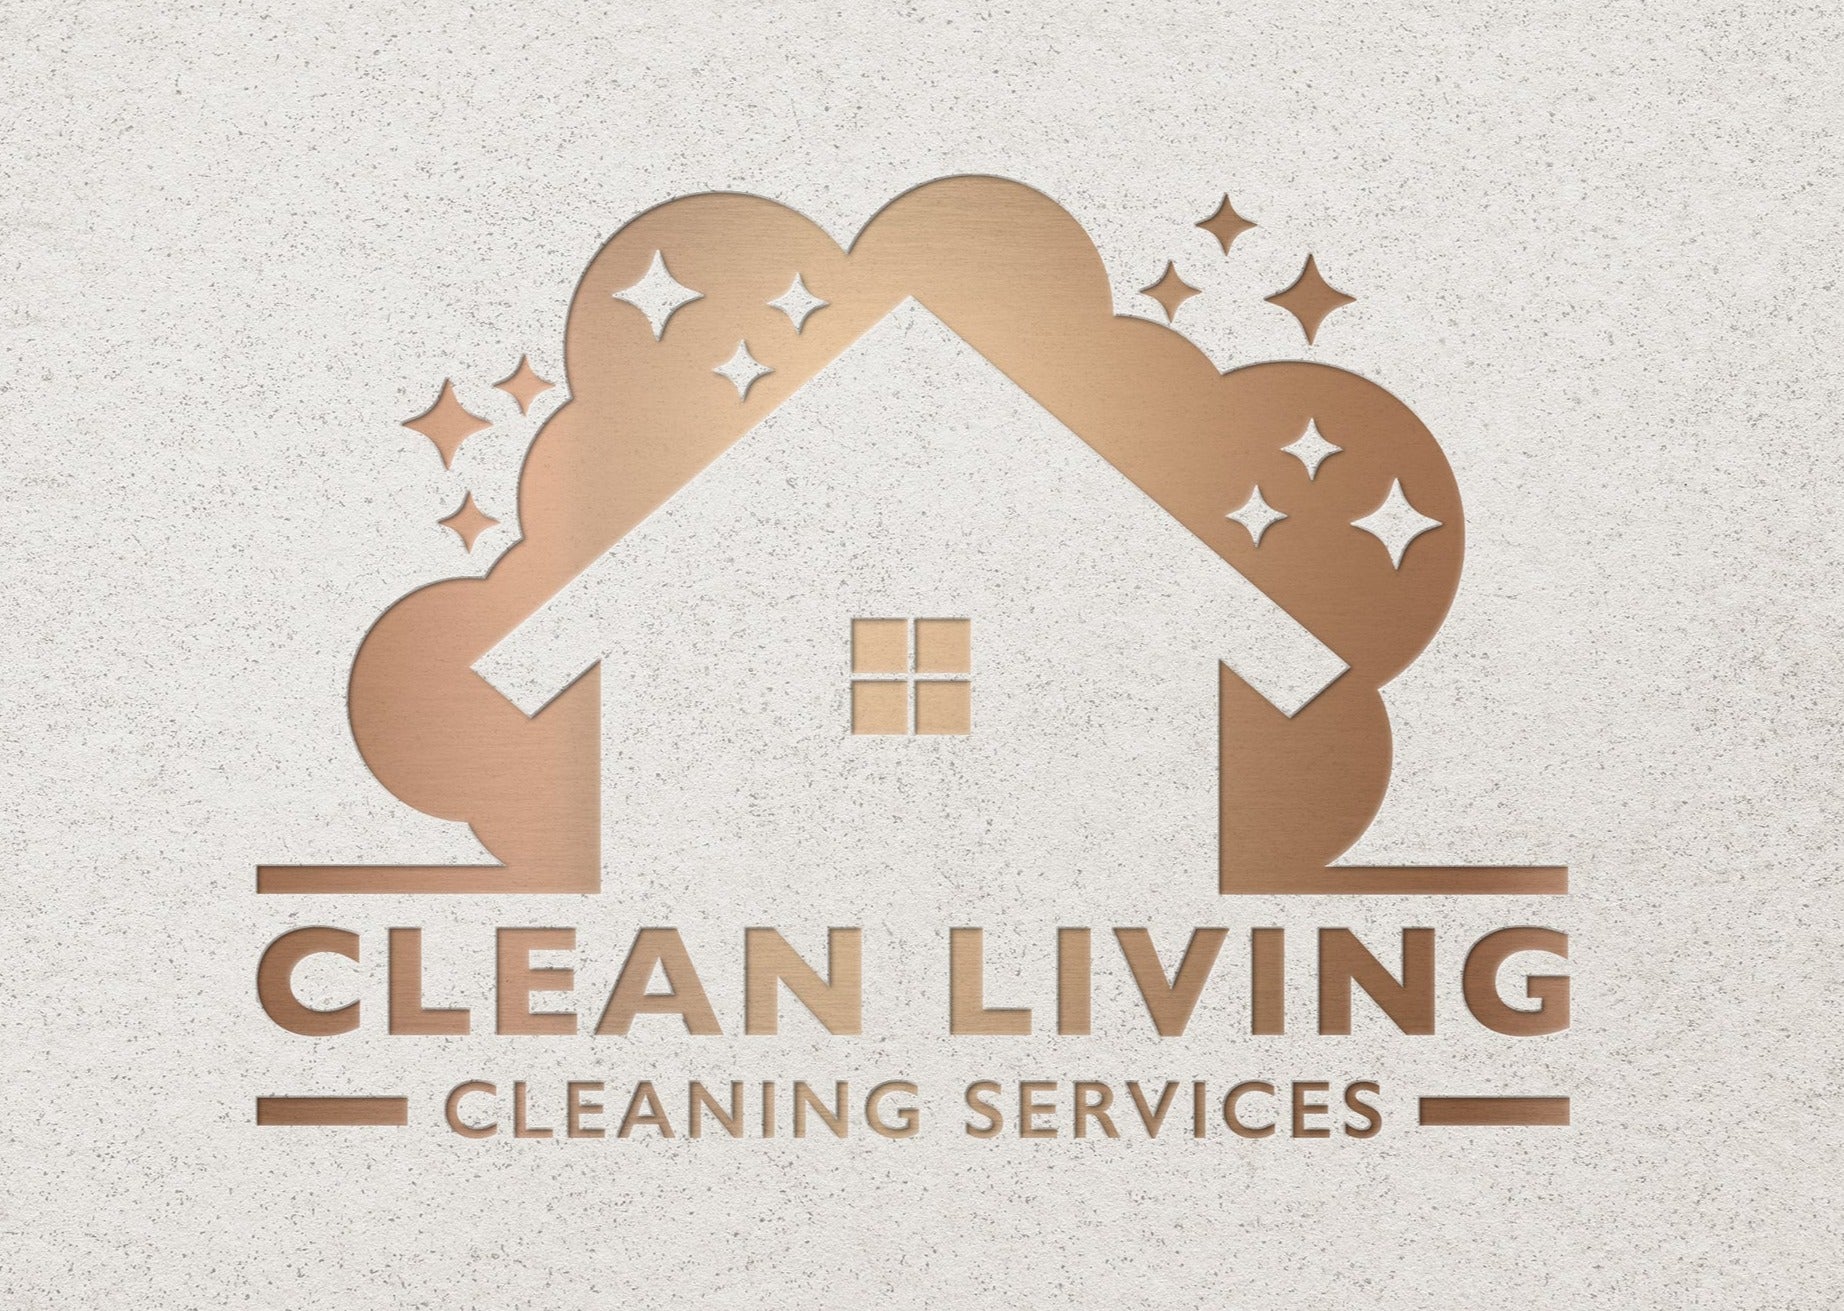 Logo Design - House Cleaning Design | Housekeeping Logo | Maid Services | Cleaning Business